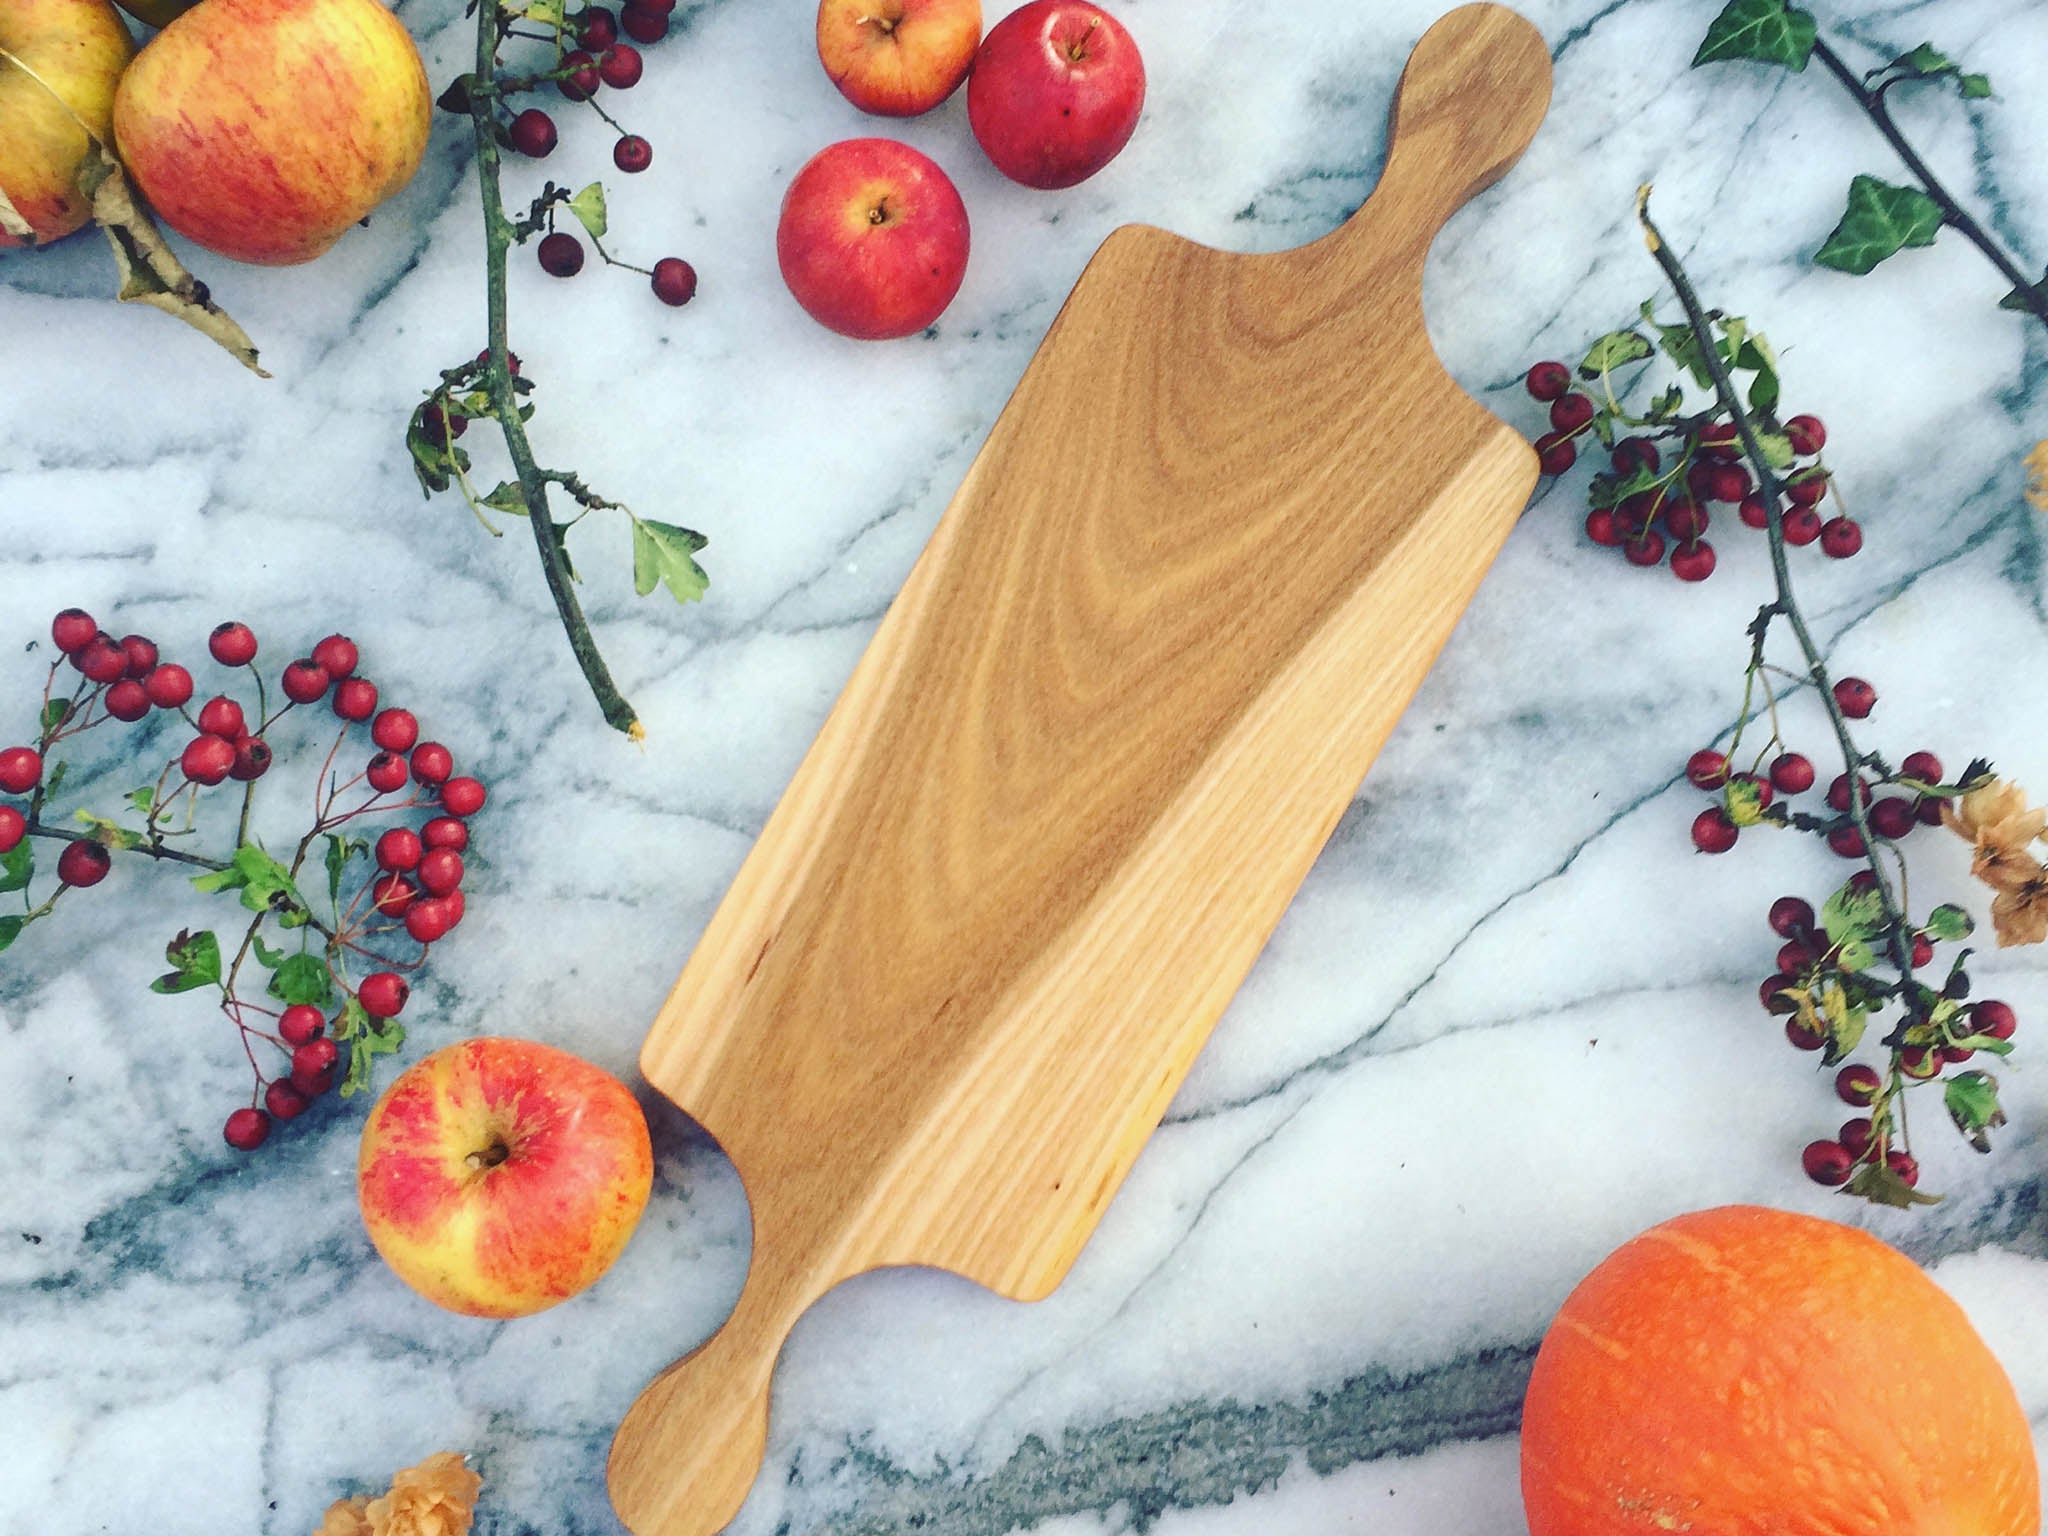 Unlike plastic, wood has naturally occurring antibacterial properties perfect for a chopping block